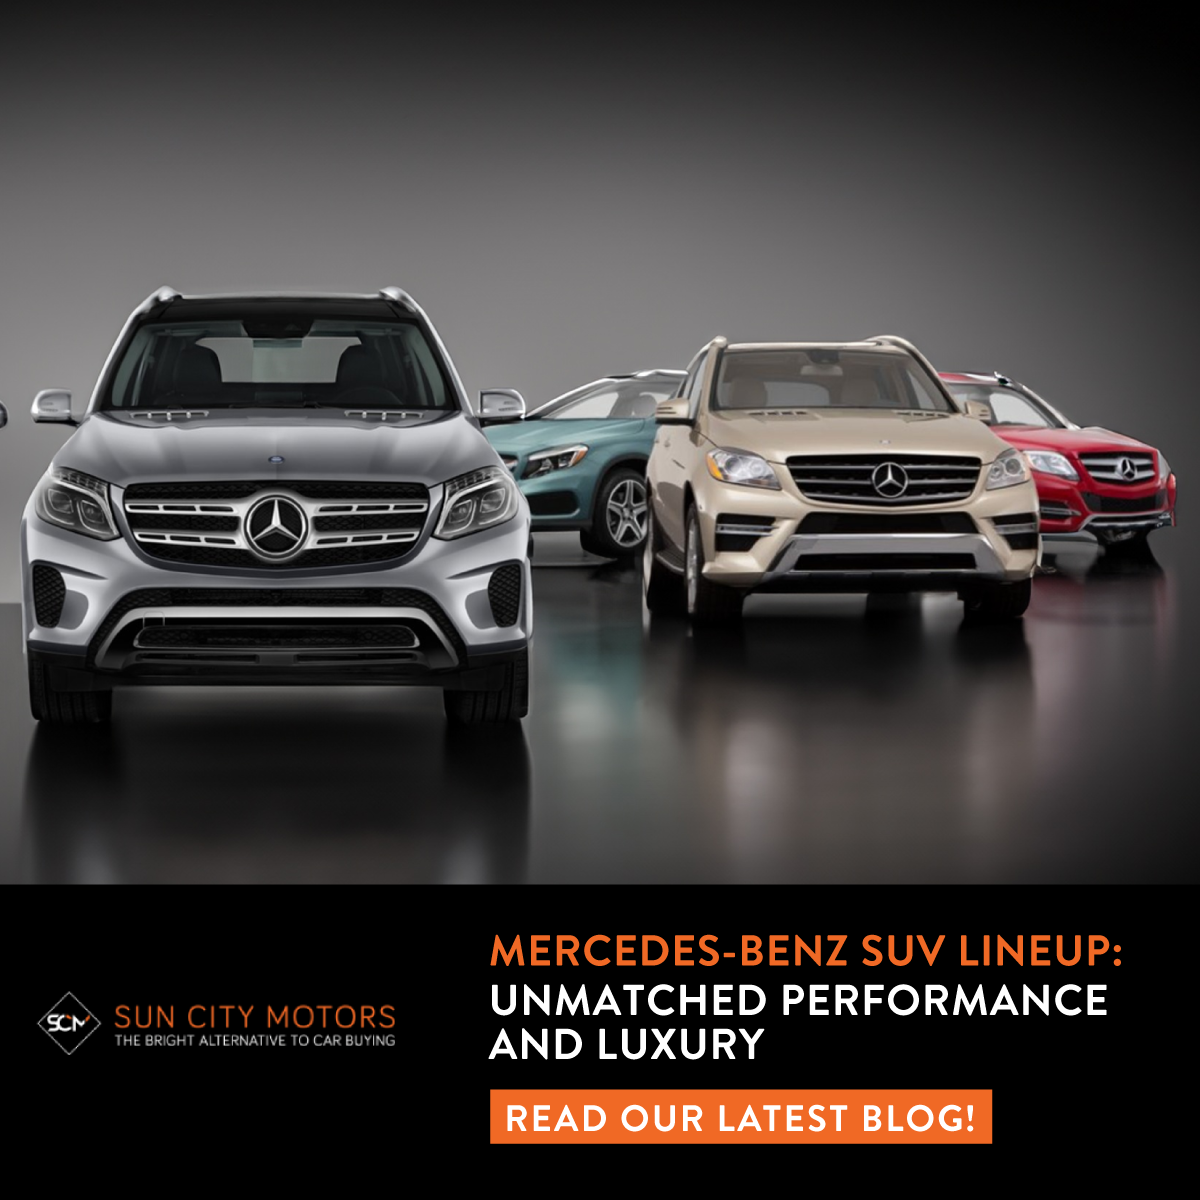 Mercedes-Benz SUV Lineup: Unmatched Performance and Luxury